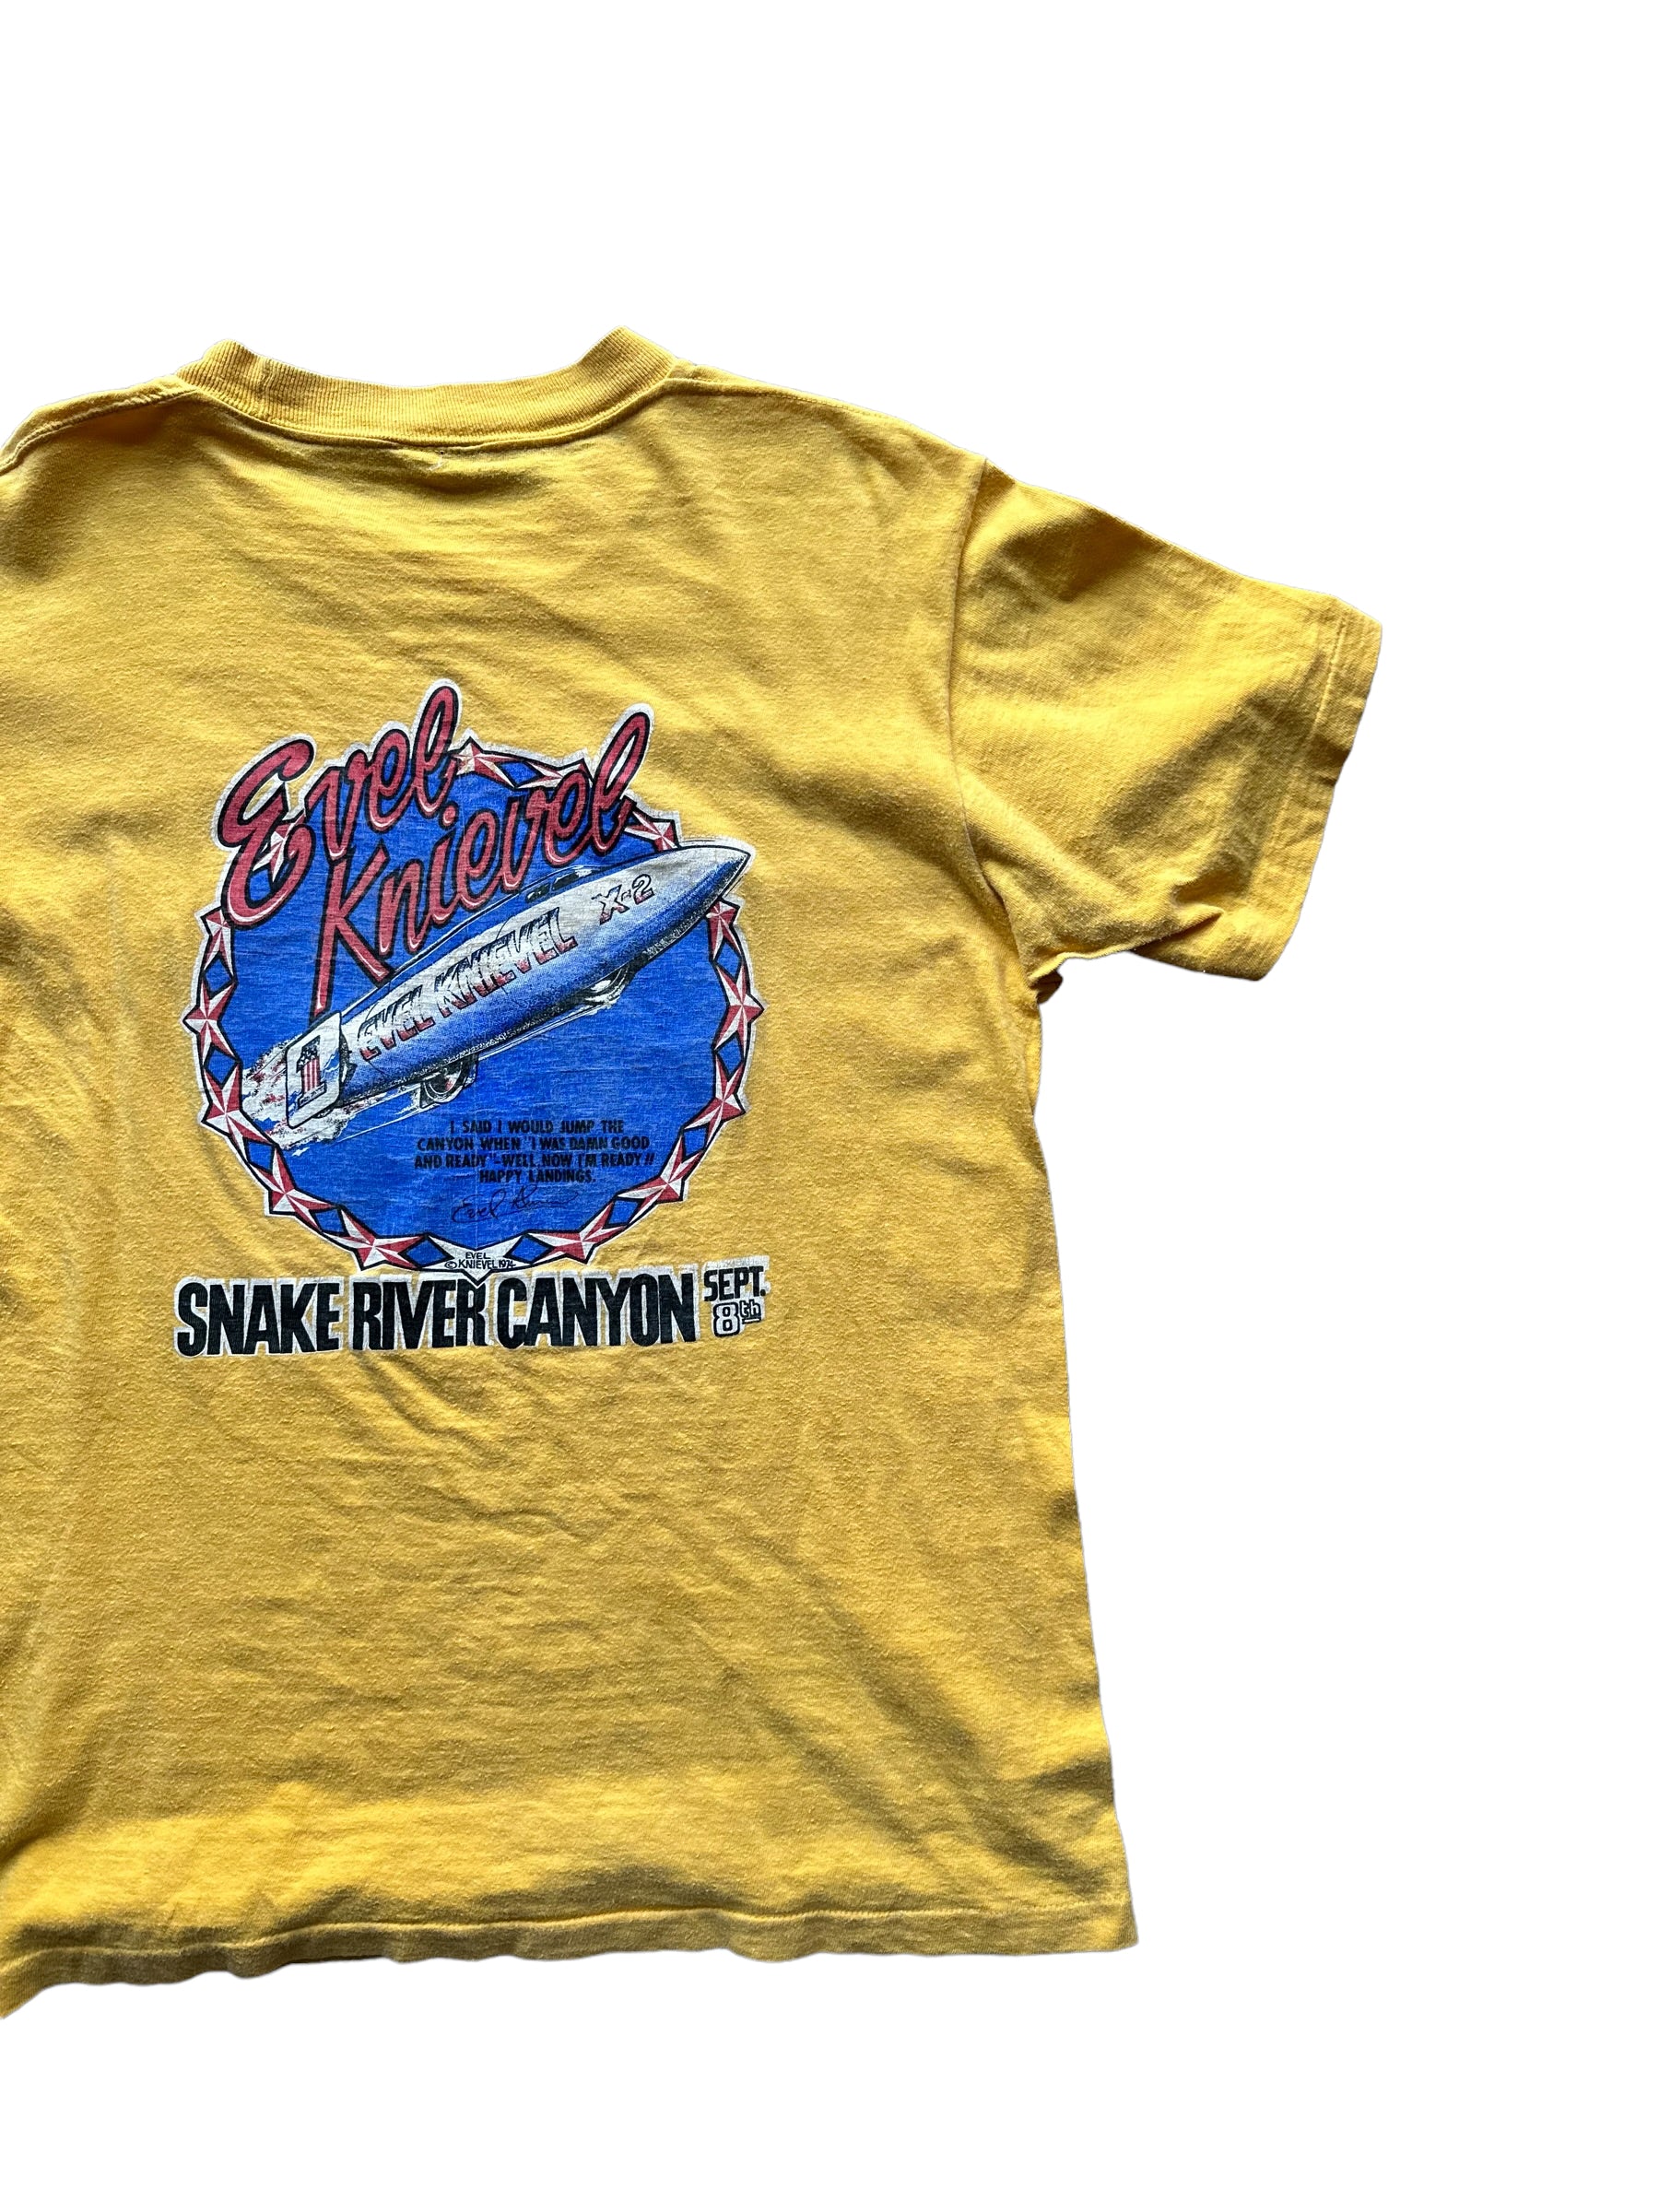 Right Rear View on Vintage Evel Knievel Snake River Canyon TShirt |  Vintage Evel Knievel Single Stitch Tee | Barn Owl Vintage Seattle